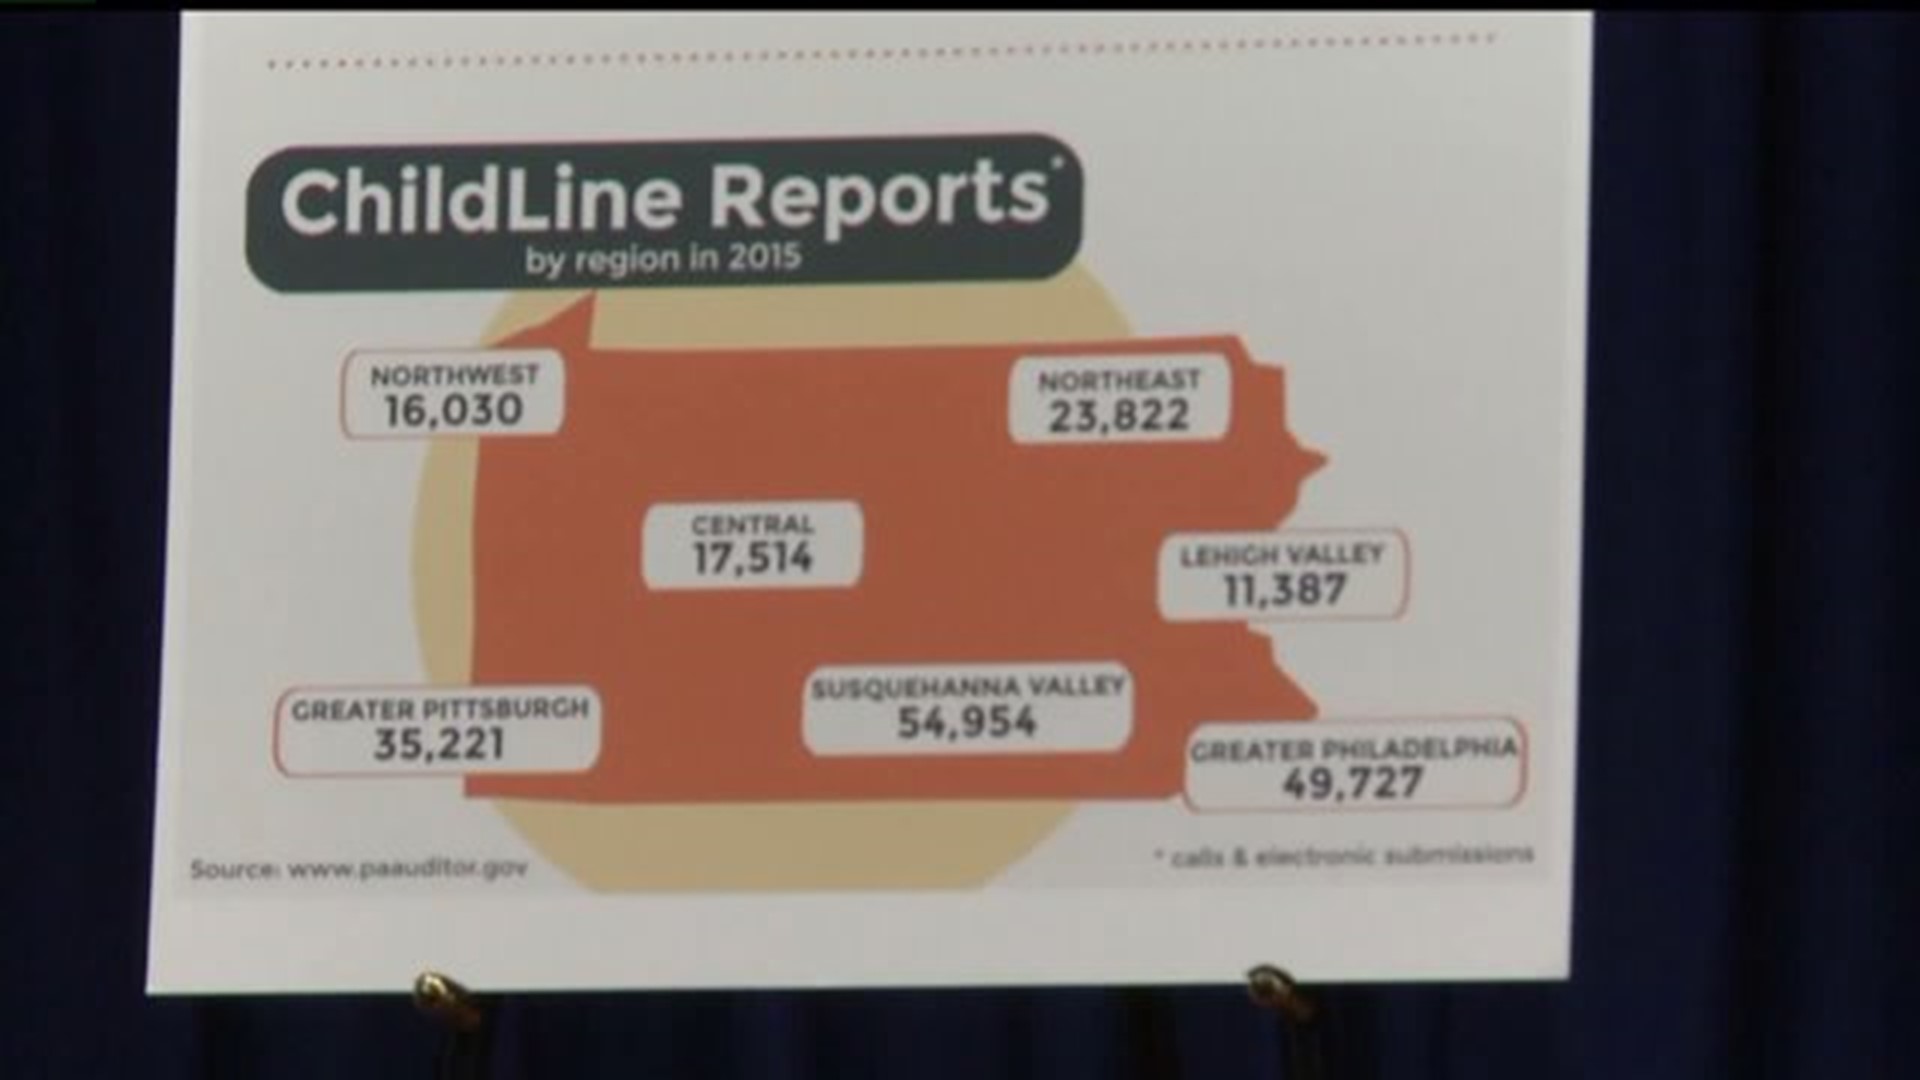 Pa. Auditor General releases final audit for child abuse hotline